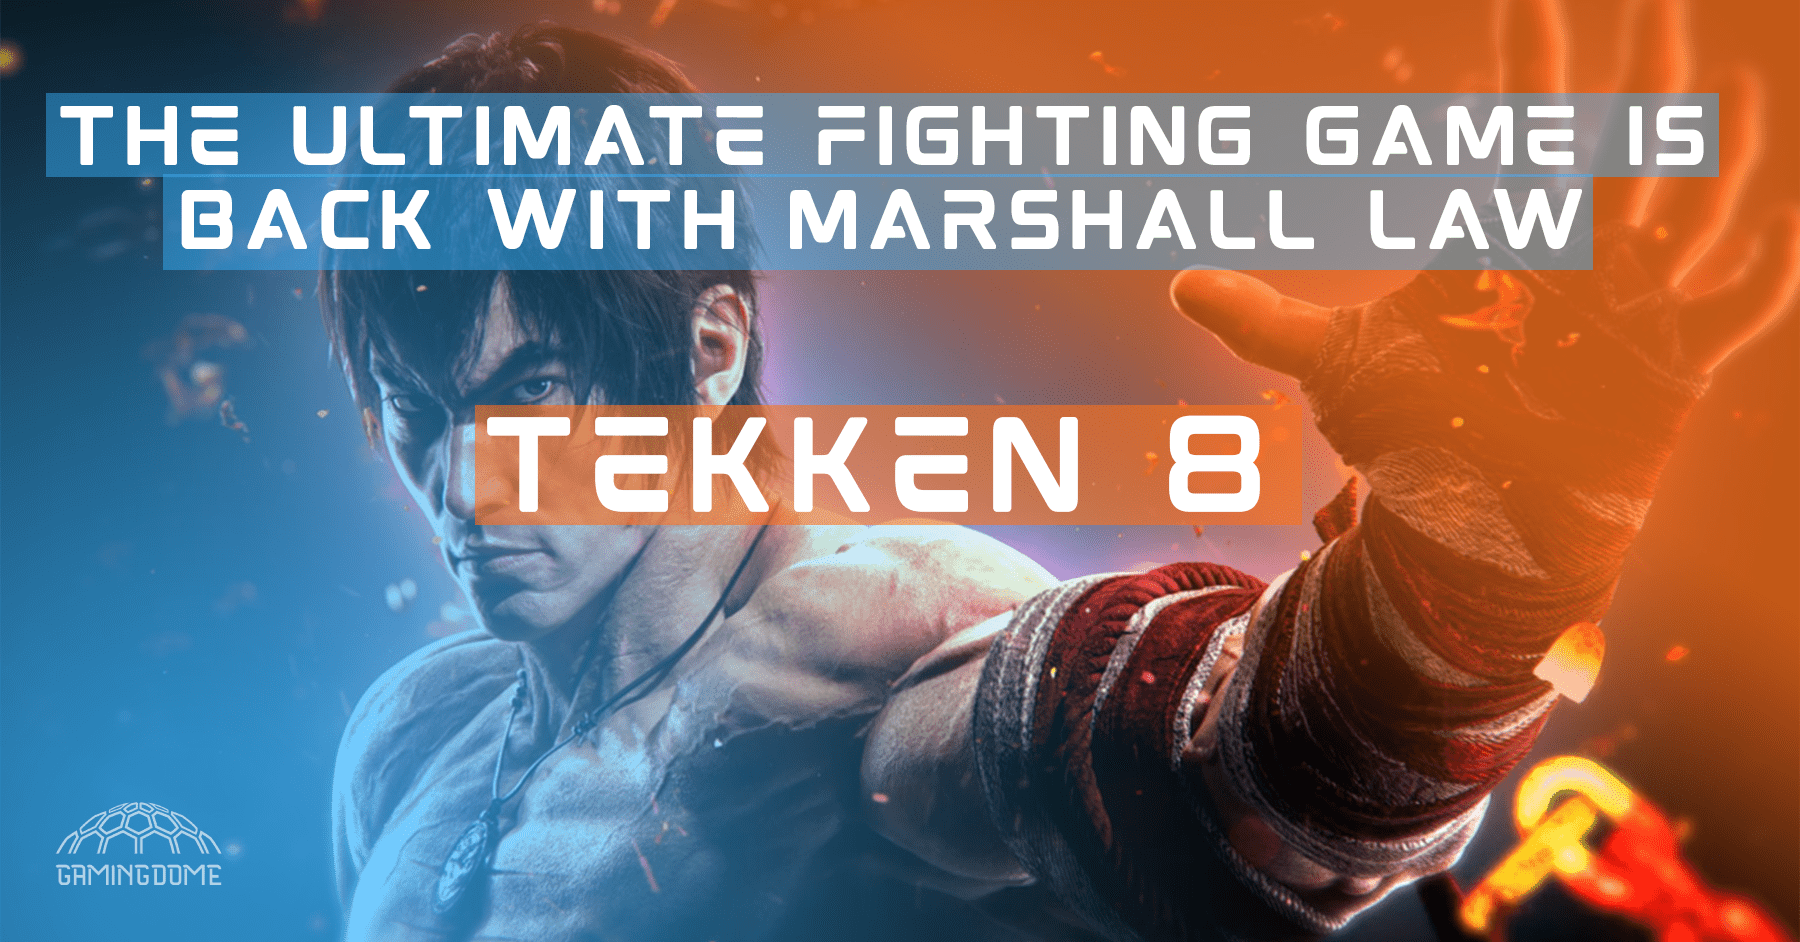 Tekken 8: The ultimate fighting game is back with Marshall Law